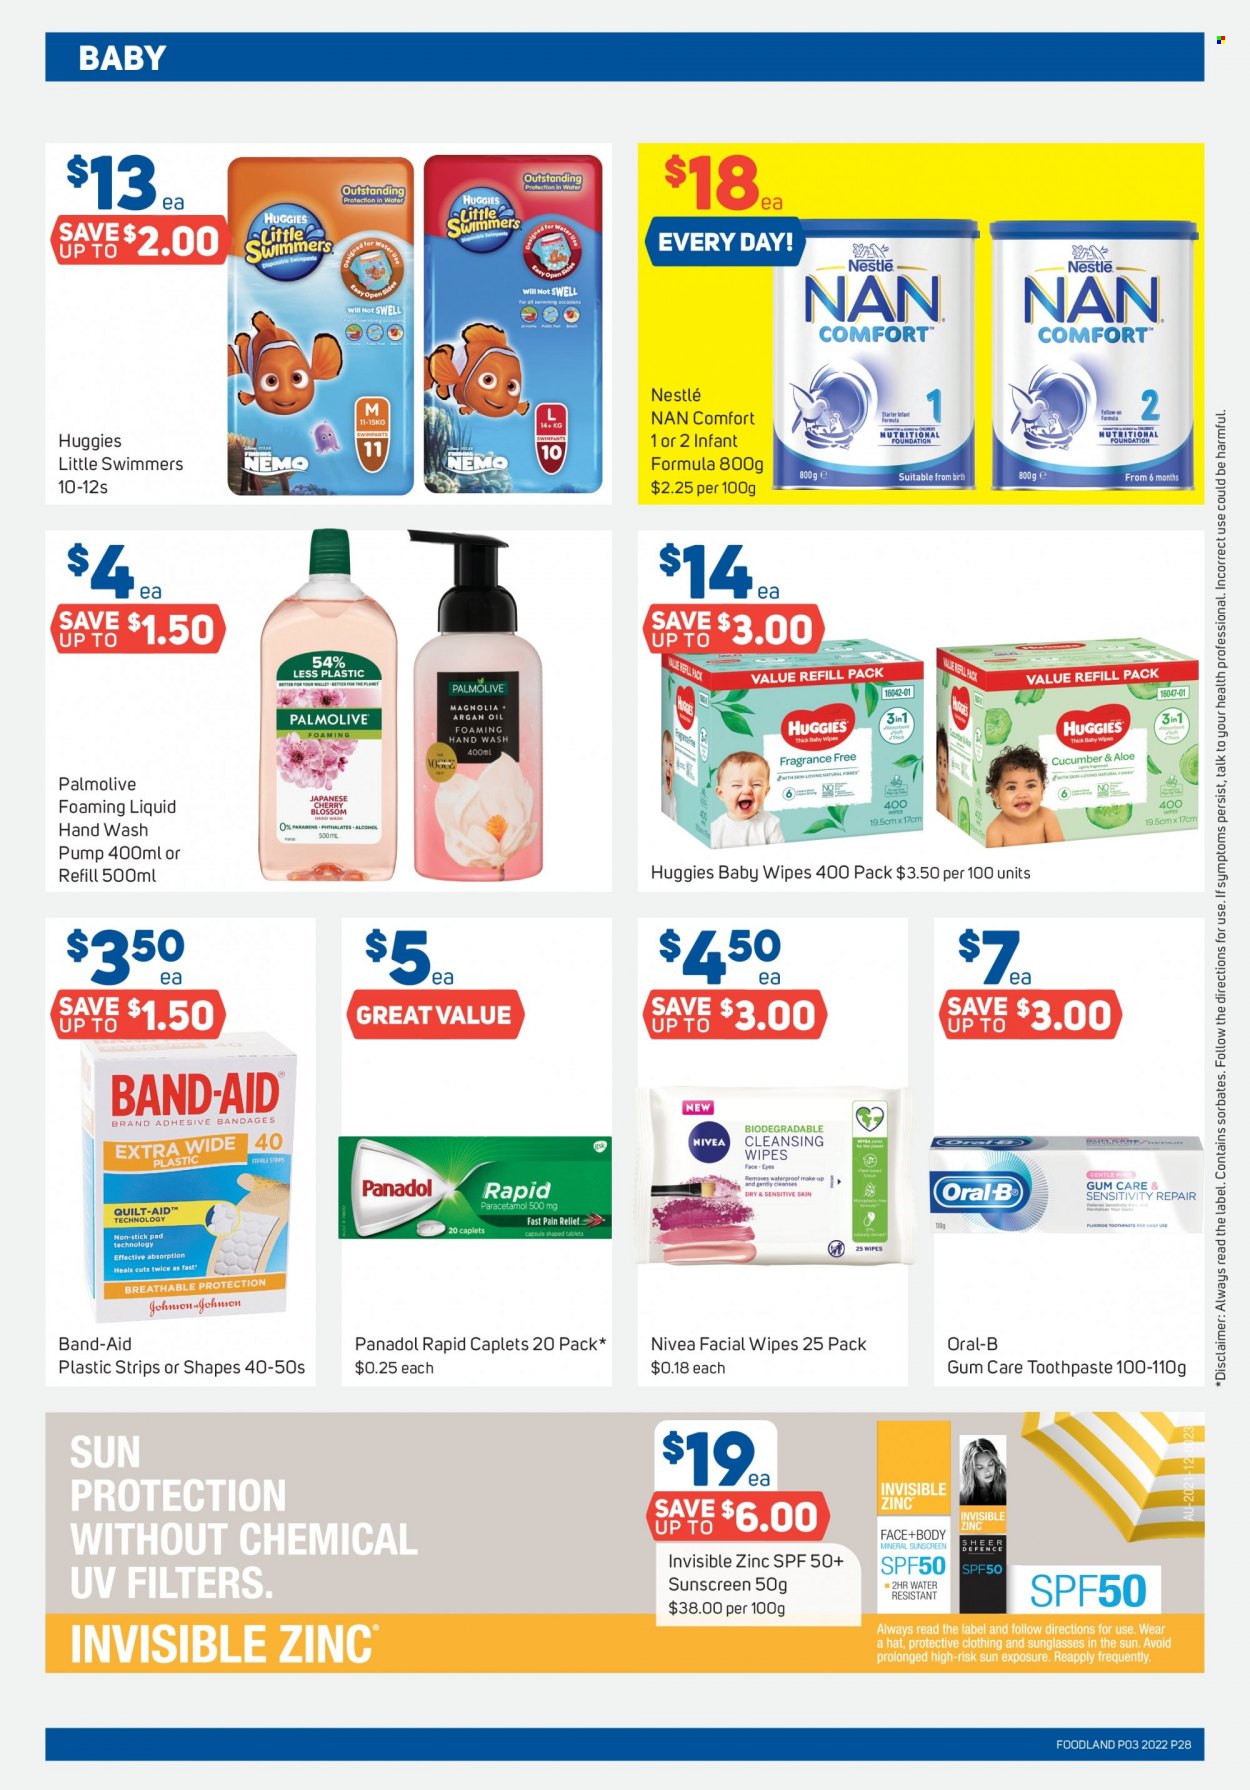 thumbnail - Foodland Catalogue - 19 Jan 2022 - 25 Jan 2022 - Sales products - cherries, Blossom, strips, Nestlé, alcohol, cleansing wipes, wipes, Huggies, baby wipes, Swimpants, Nivea, hand wash, Palmolive, Oral-B, toothpaste, makeup, pain relief, argan oil, zinc, Panadol, band-aid. Page 28.